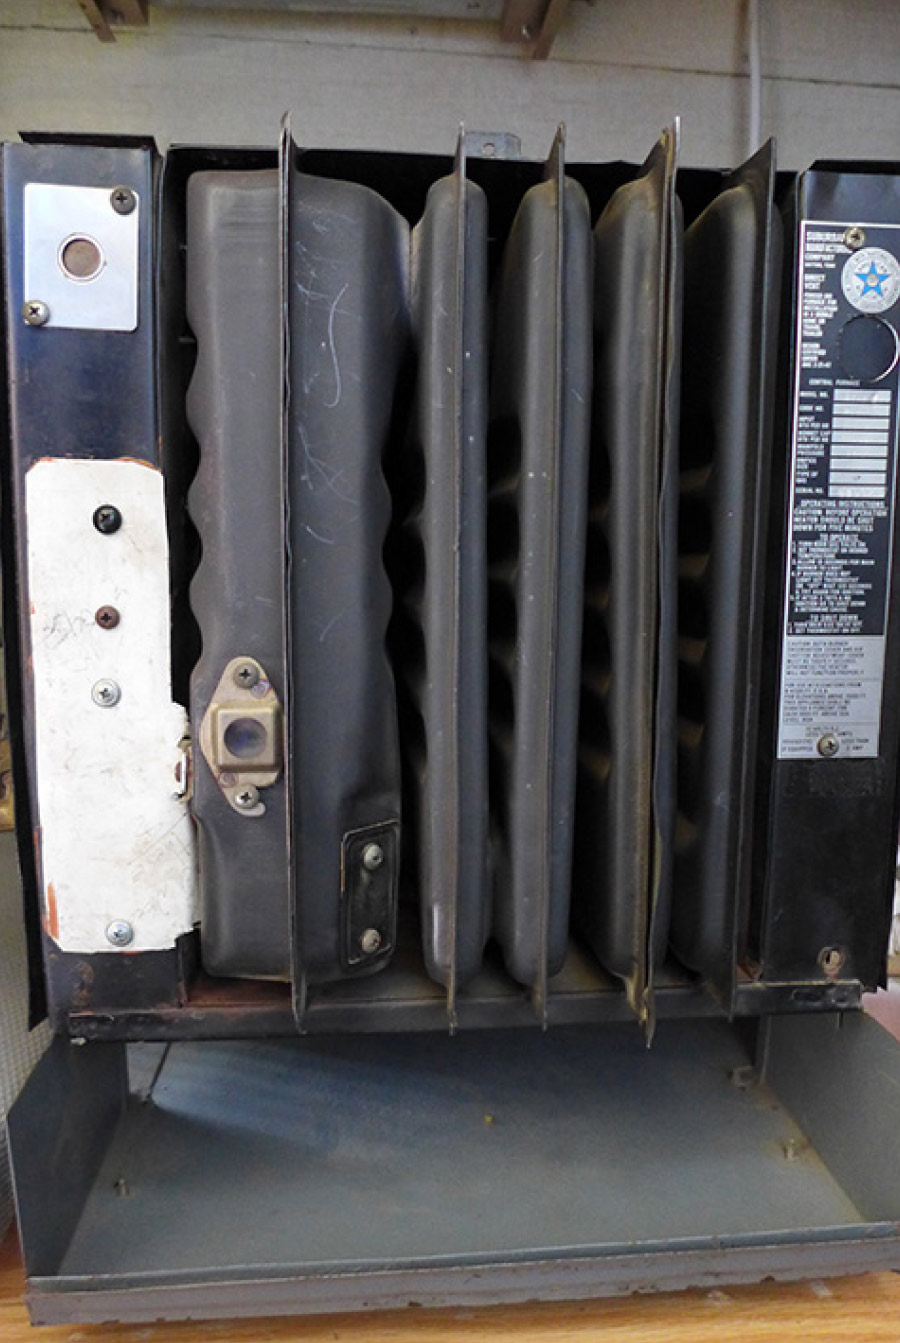 front cover removed on older Suburban T-Series furnace